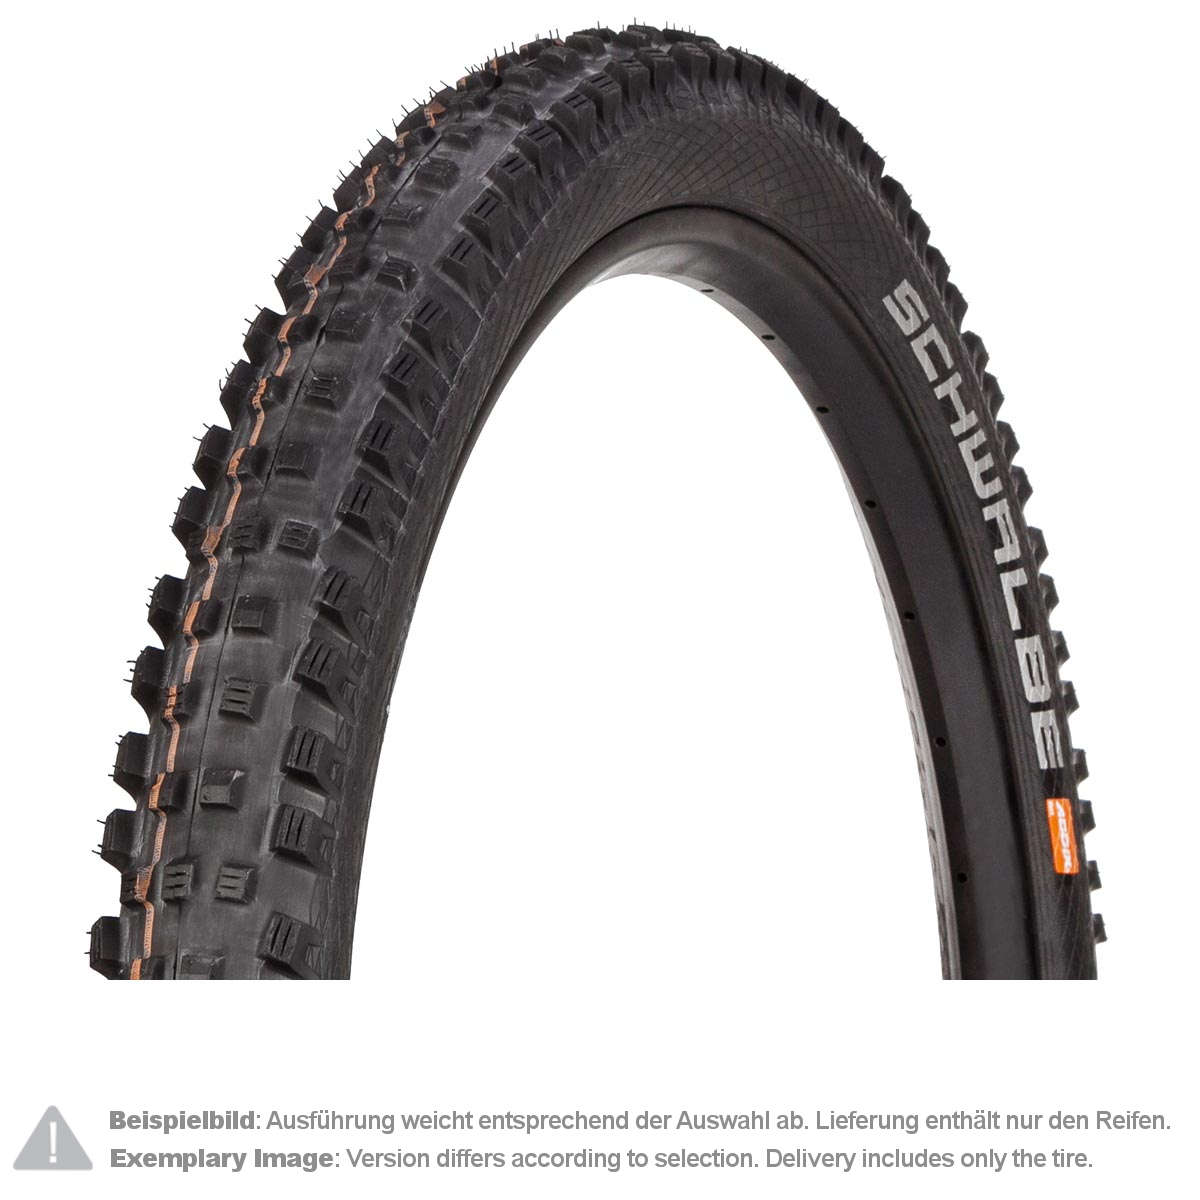 Details about   Schwalbe Magic Mary Tire 27.5 x 2.35 SUPER GRAVITY Tubeless Snakeskin Addix 650B 